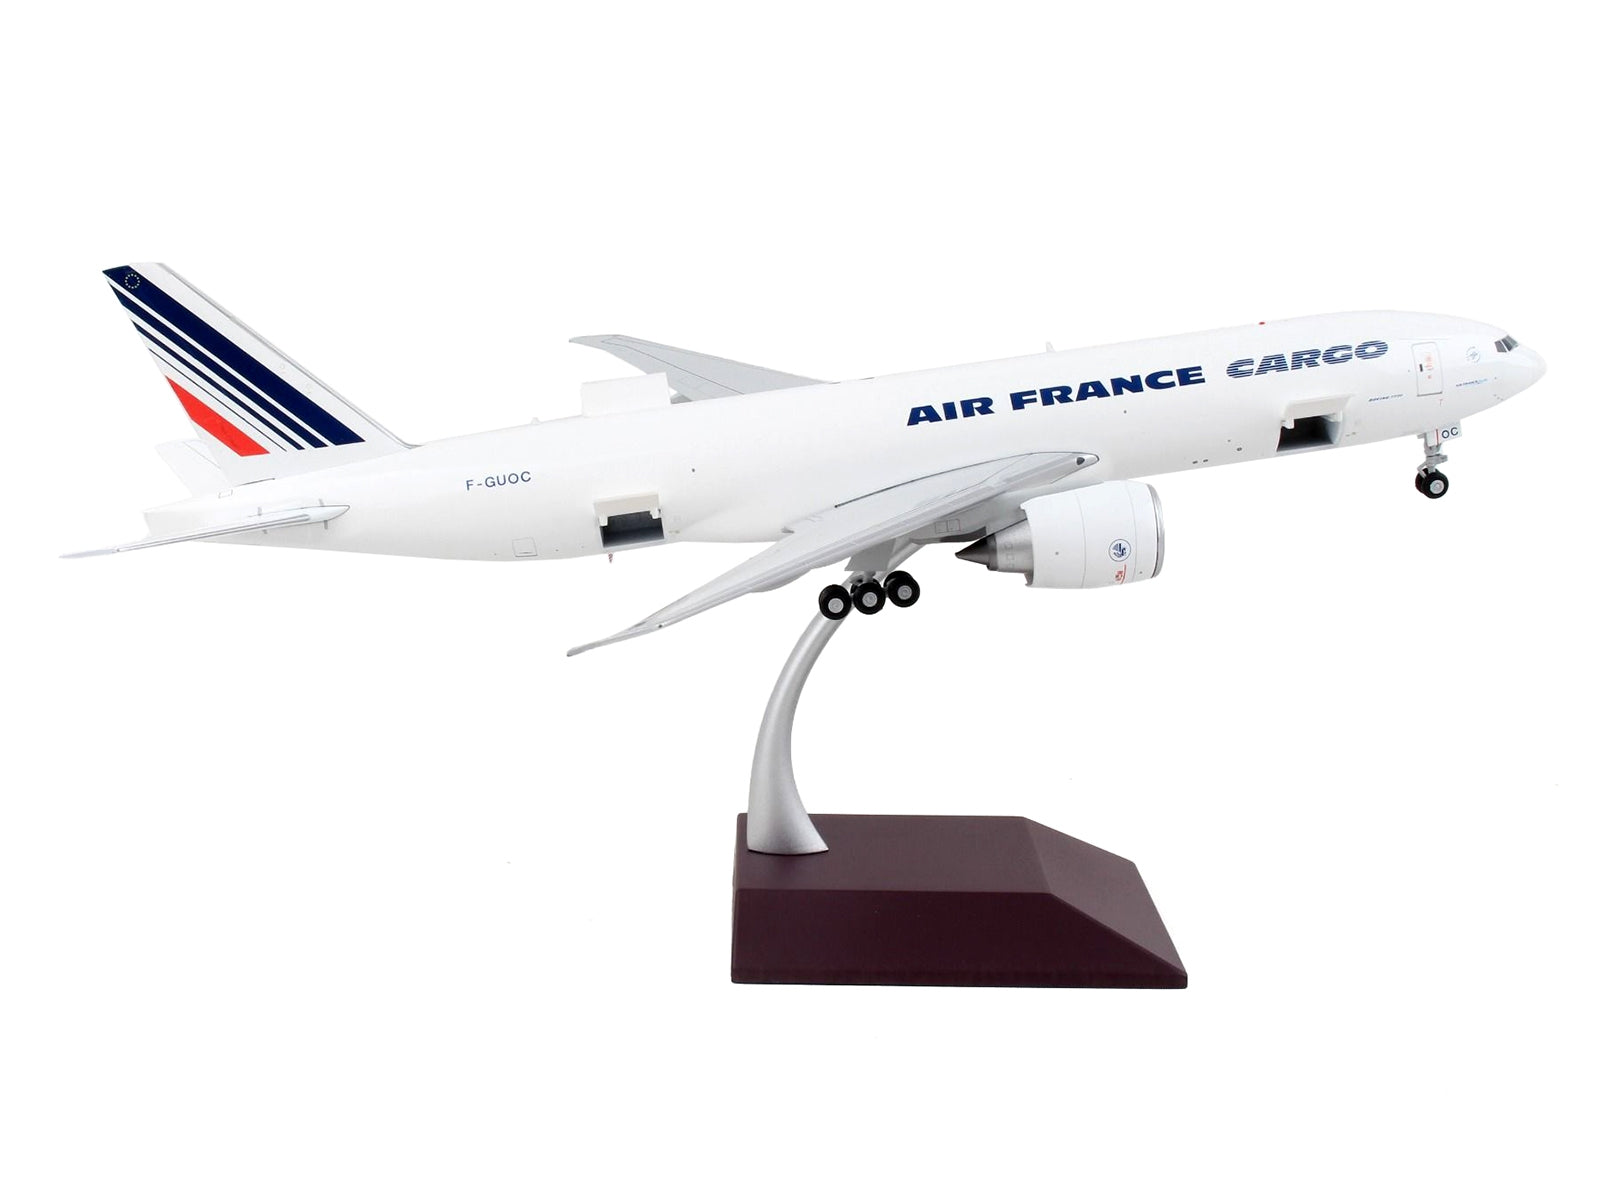 Boeing 777F Commercial Aircraft "Air France Cargo" White with Striped Tail "Gemini 200 - Interactive"